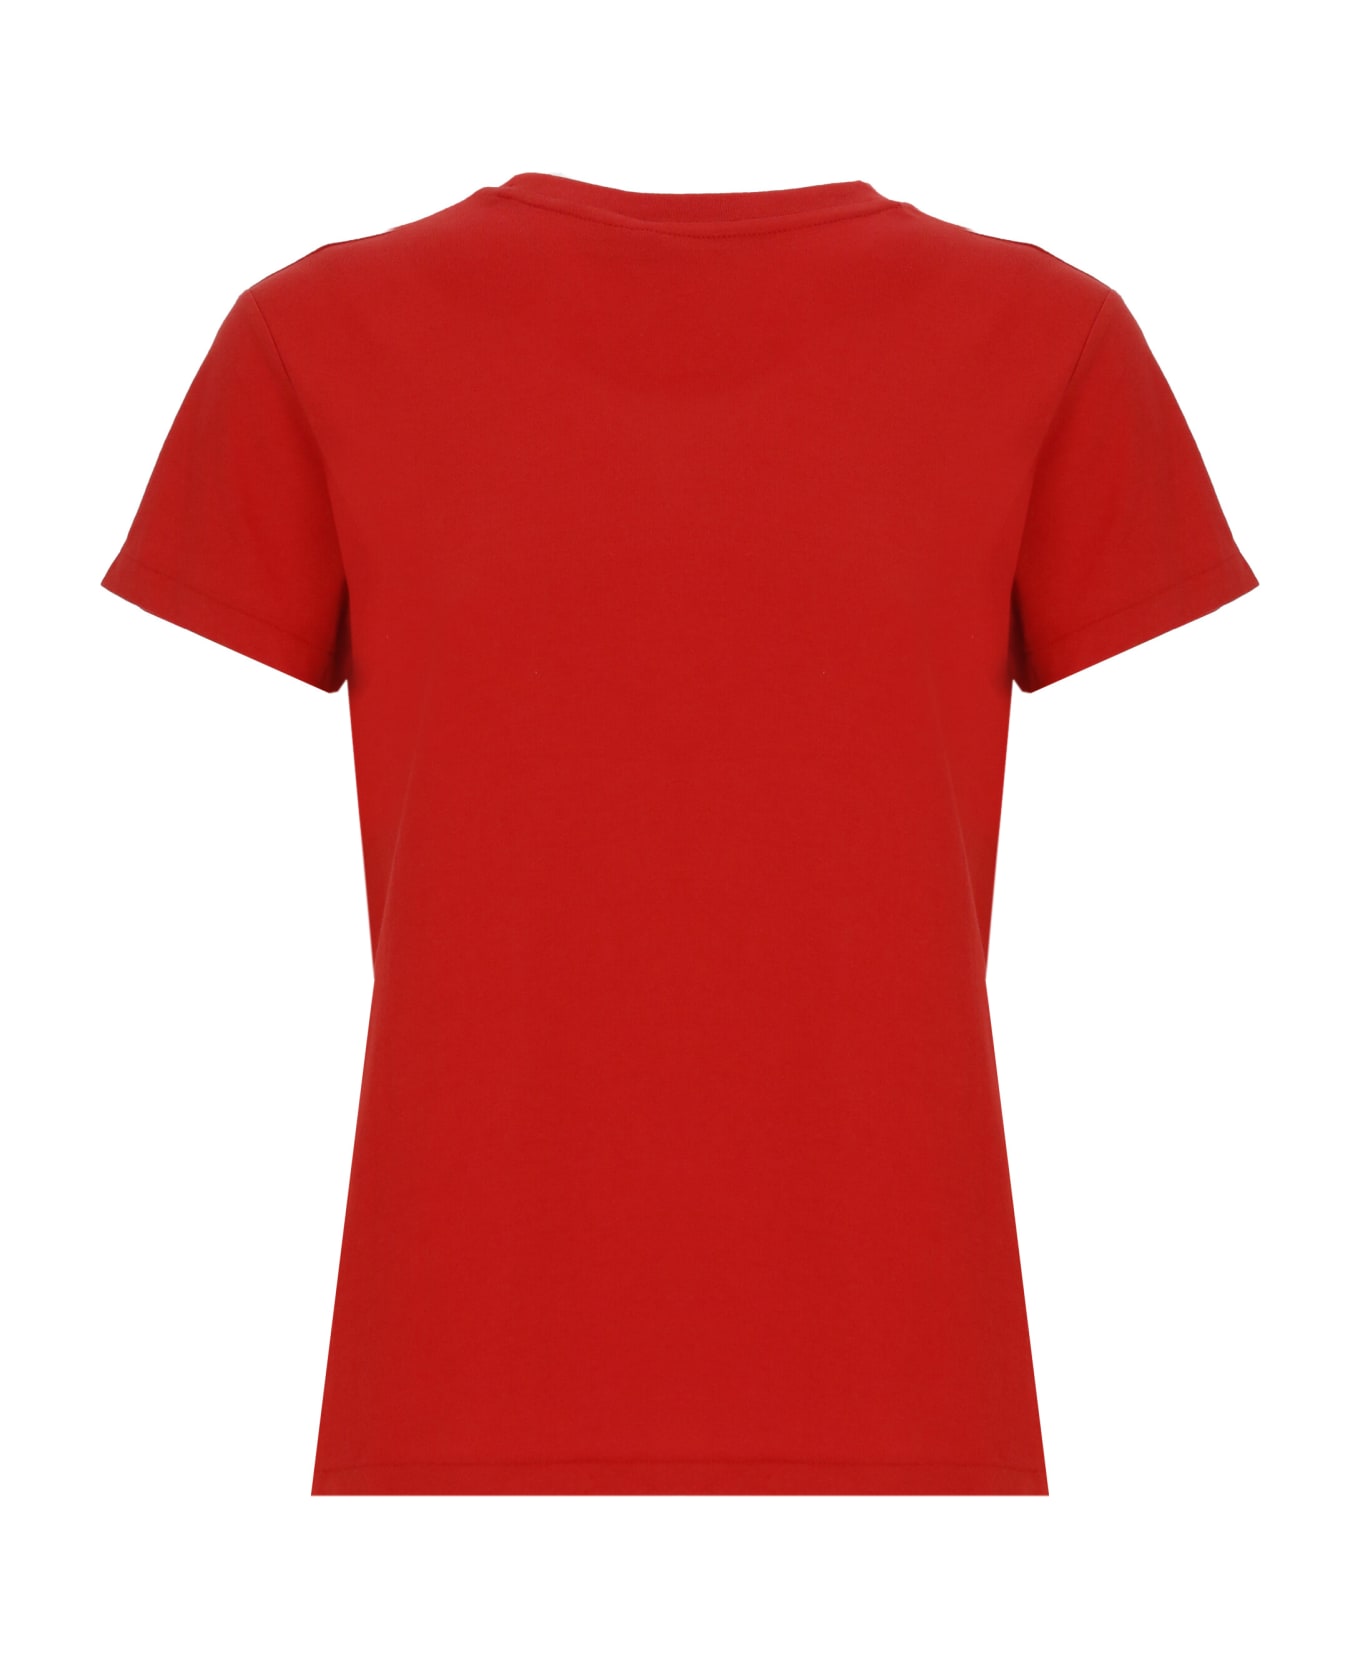 Ralph Lauren T-shirt With Pony - Faded Red